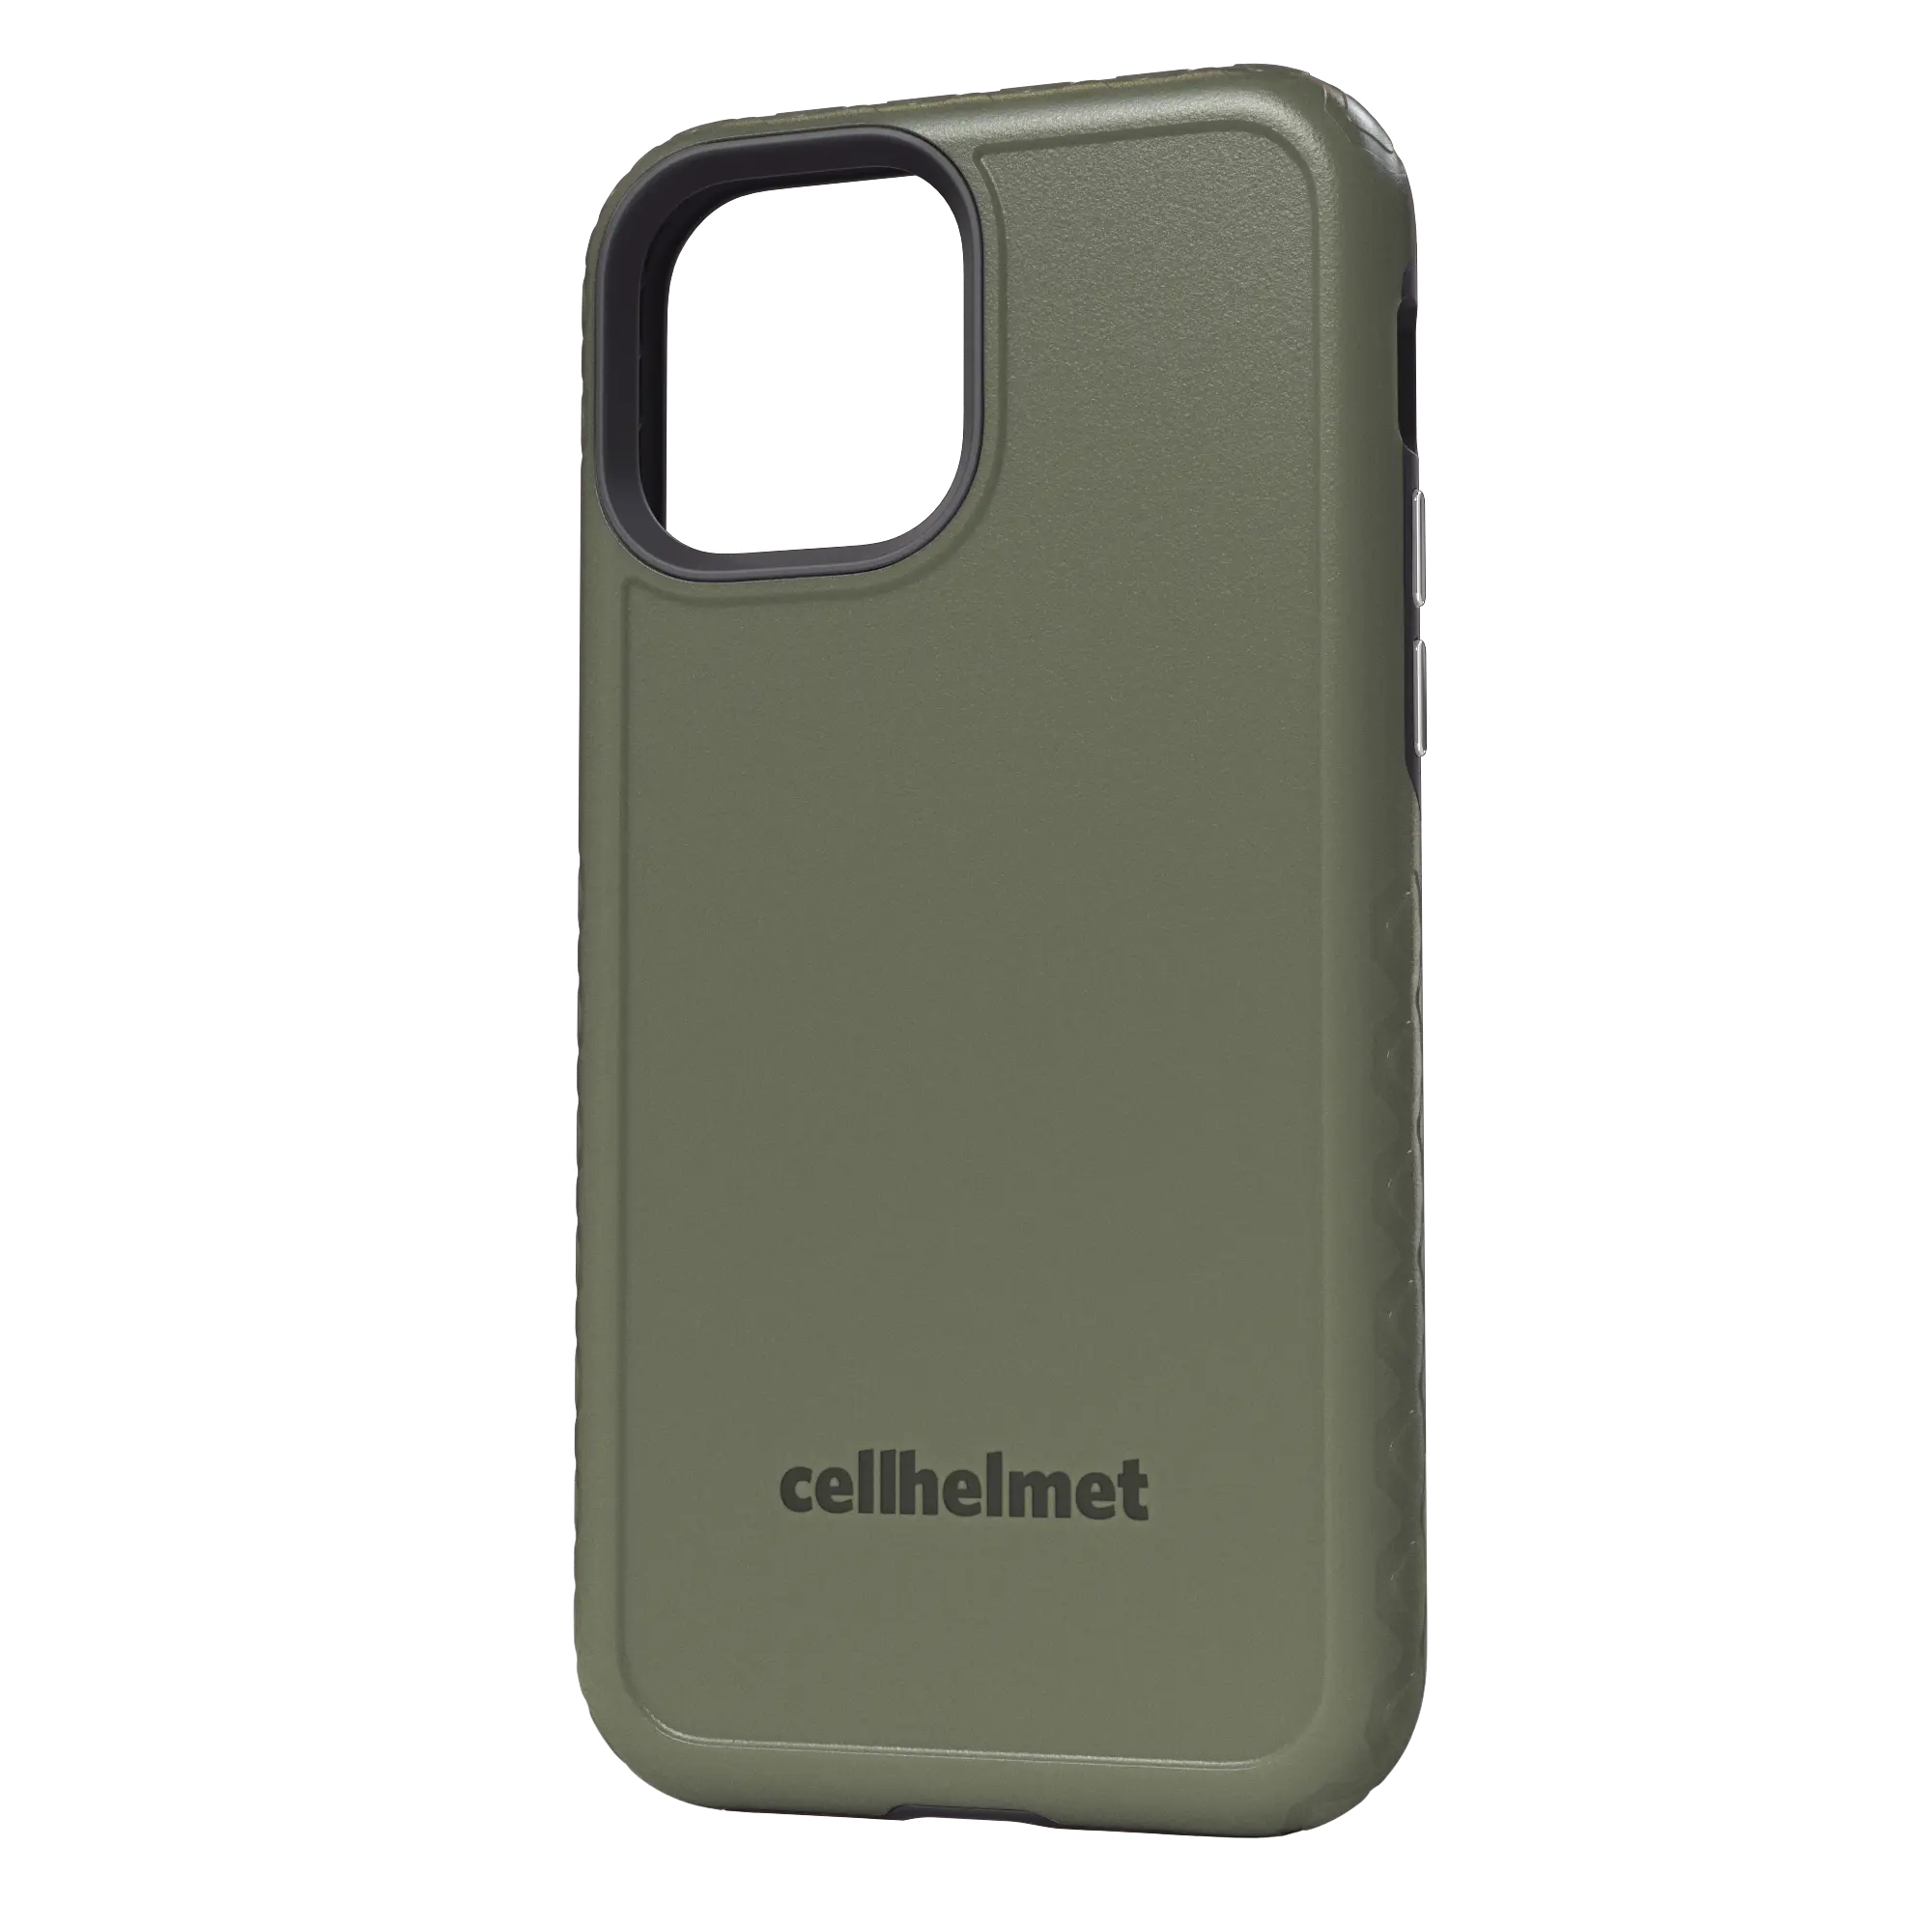 Green cellhelmet Personalized Case for iPhone 12 Pro